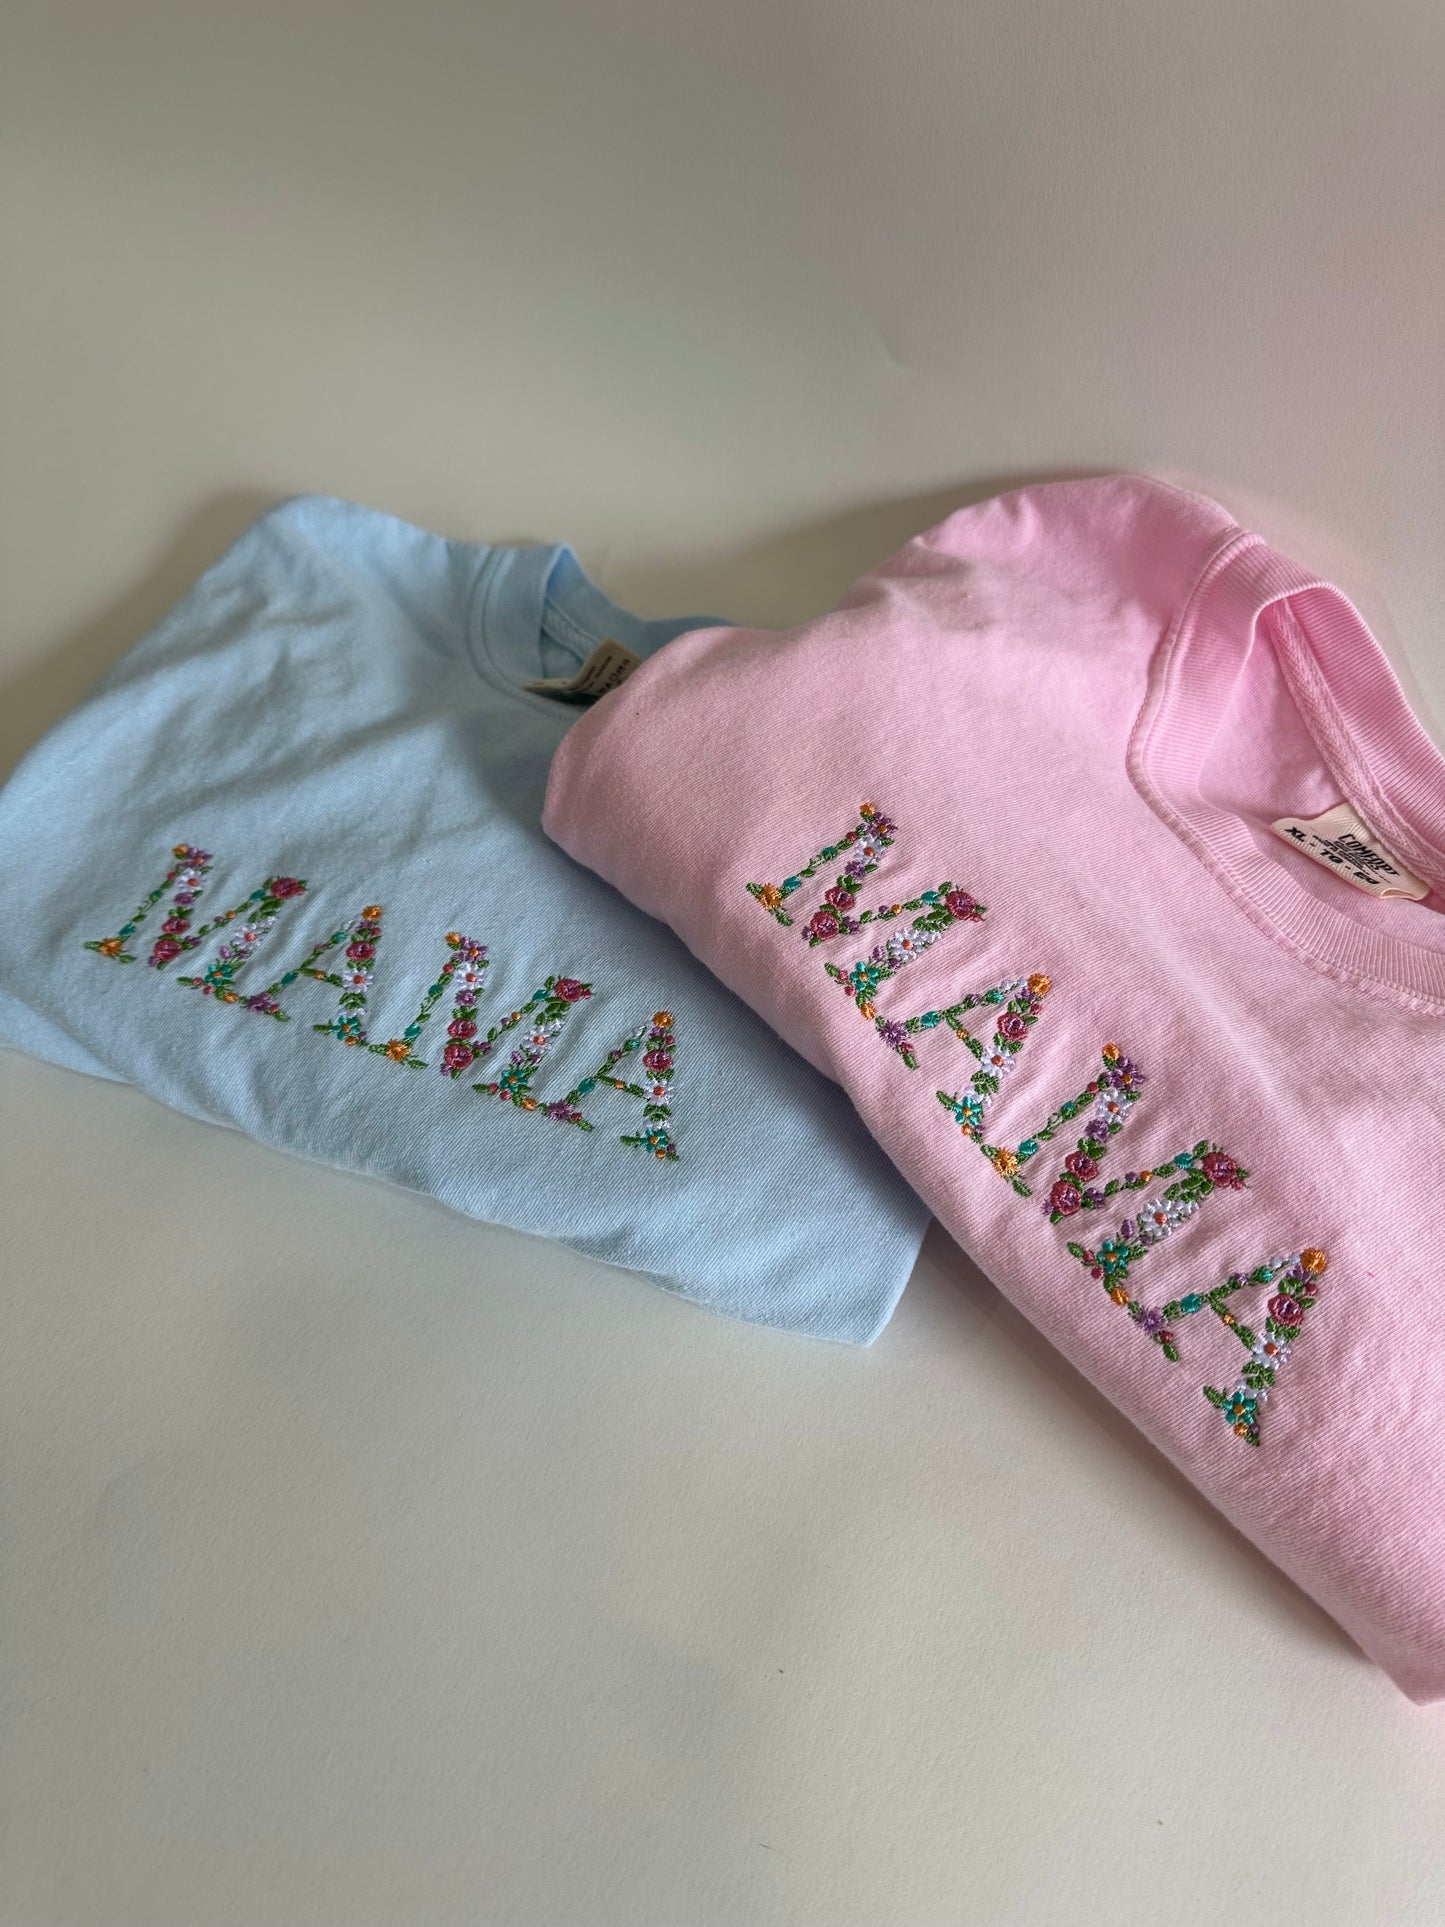 Floral embroidered MAMA shirt